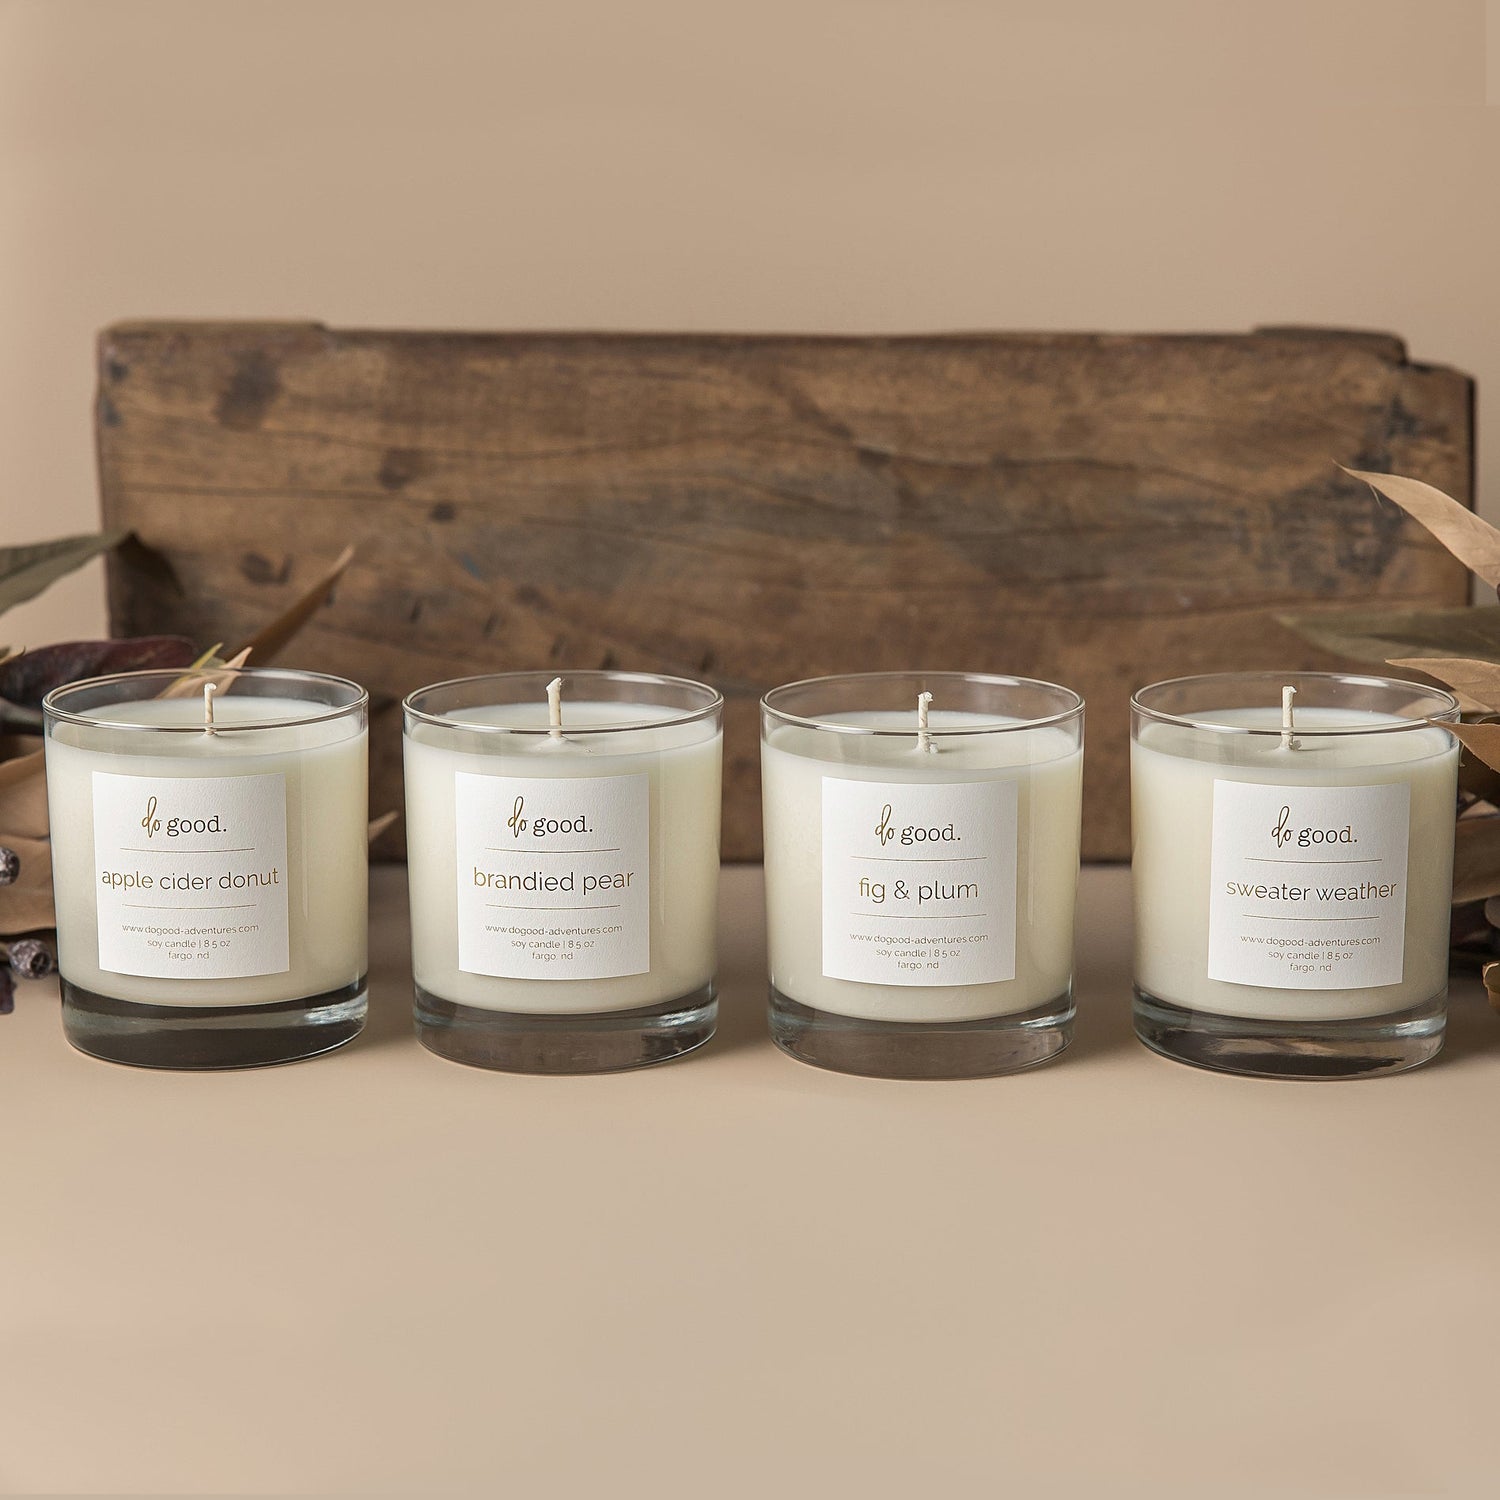 image of four soy candles in the winter/fall collection:  apple cider donut, brandied pear, fig & plum, and sweater weather